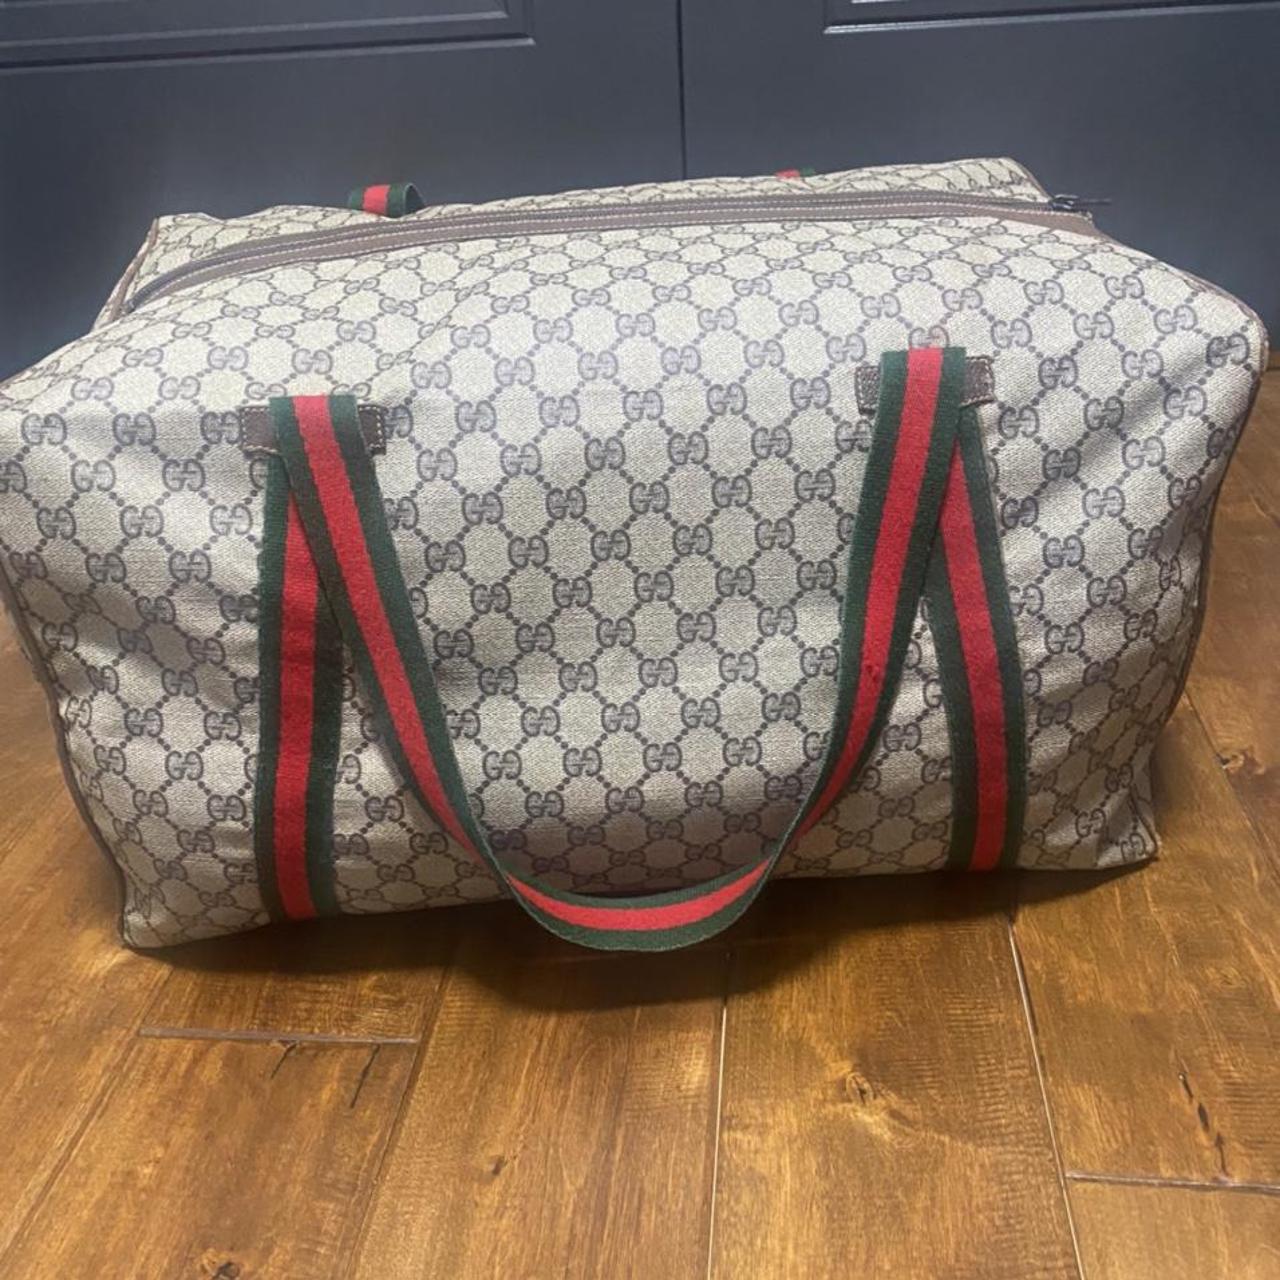 Gucci, Bags, Vintage Gucci Duffle Bag White Black And Gray